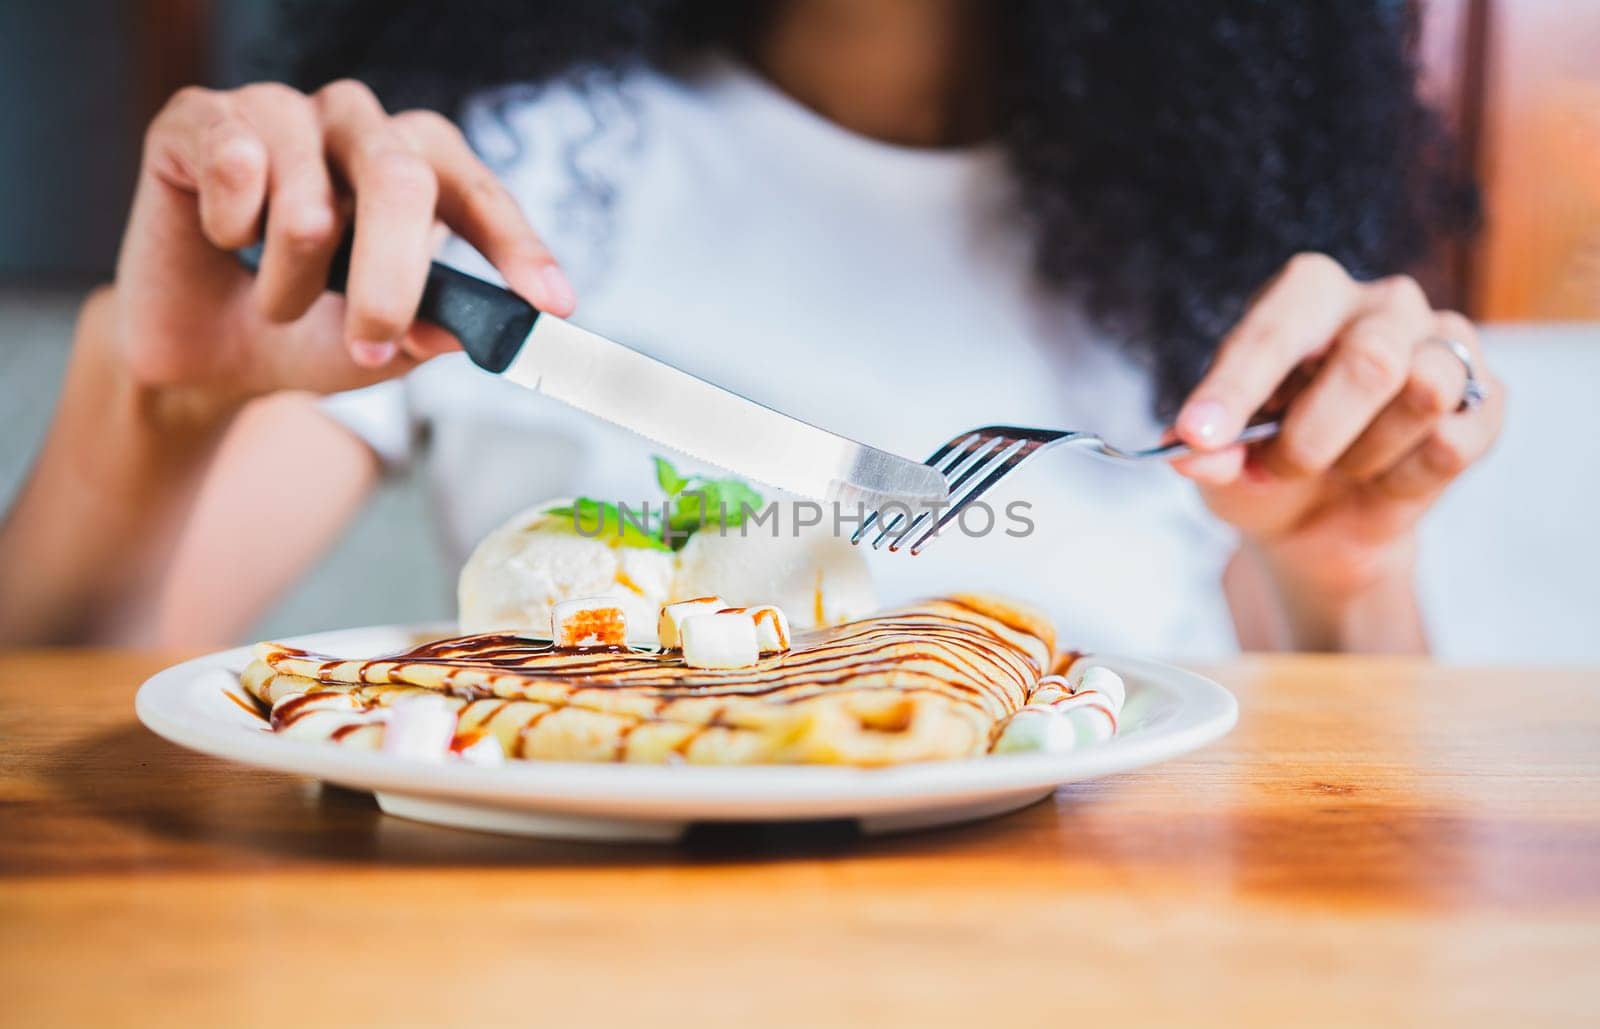 Woman hands eating chocolate crepe and ice cream with fork. Close up of woman eating a chocolate crepe with fork